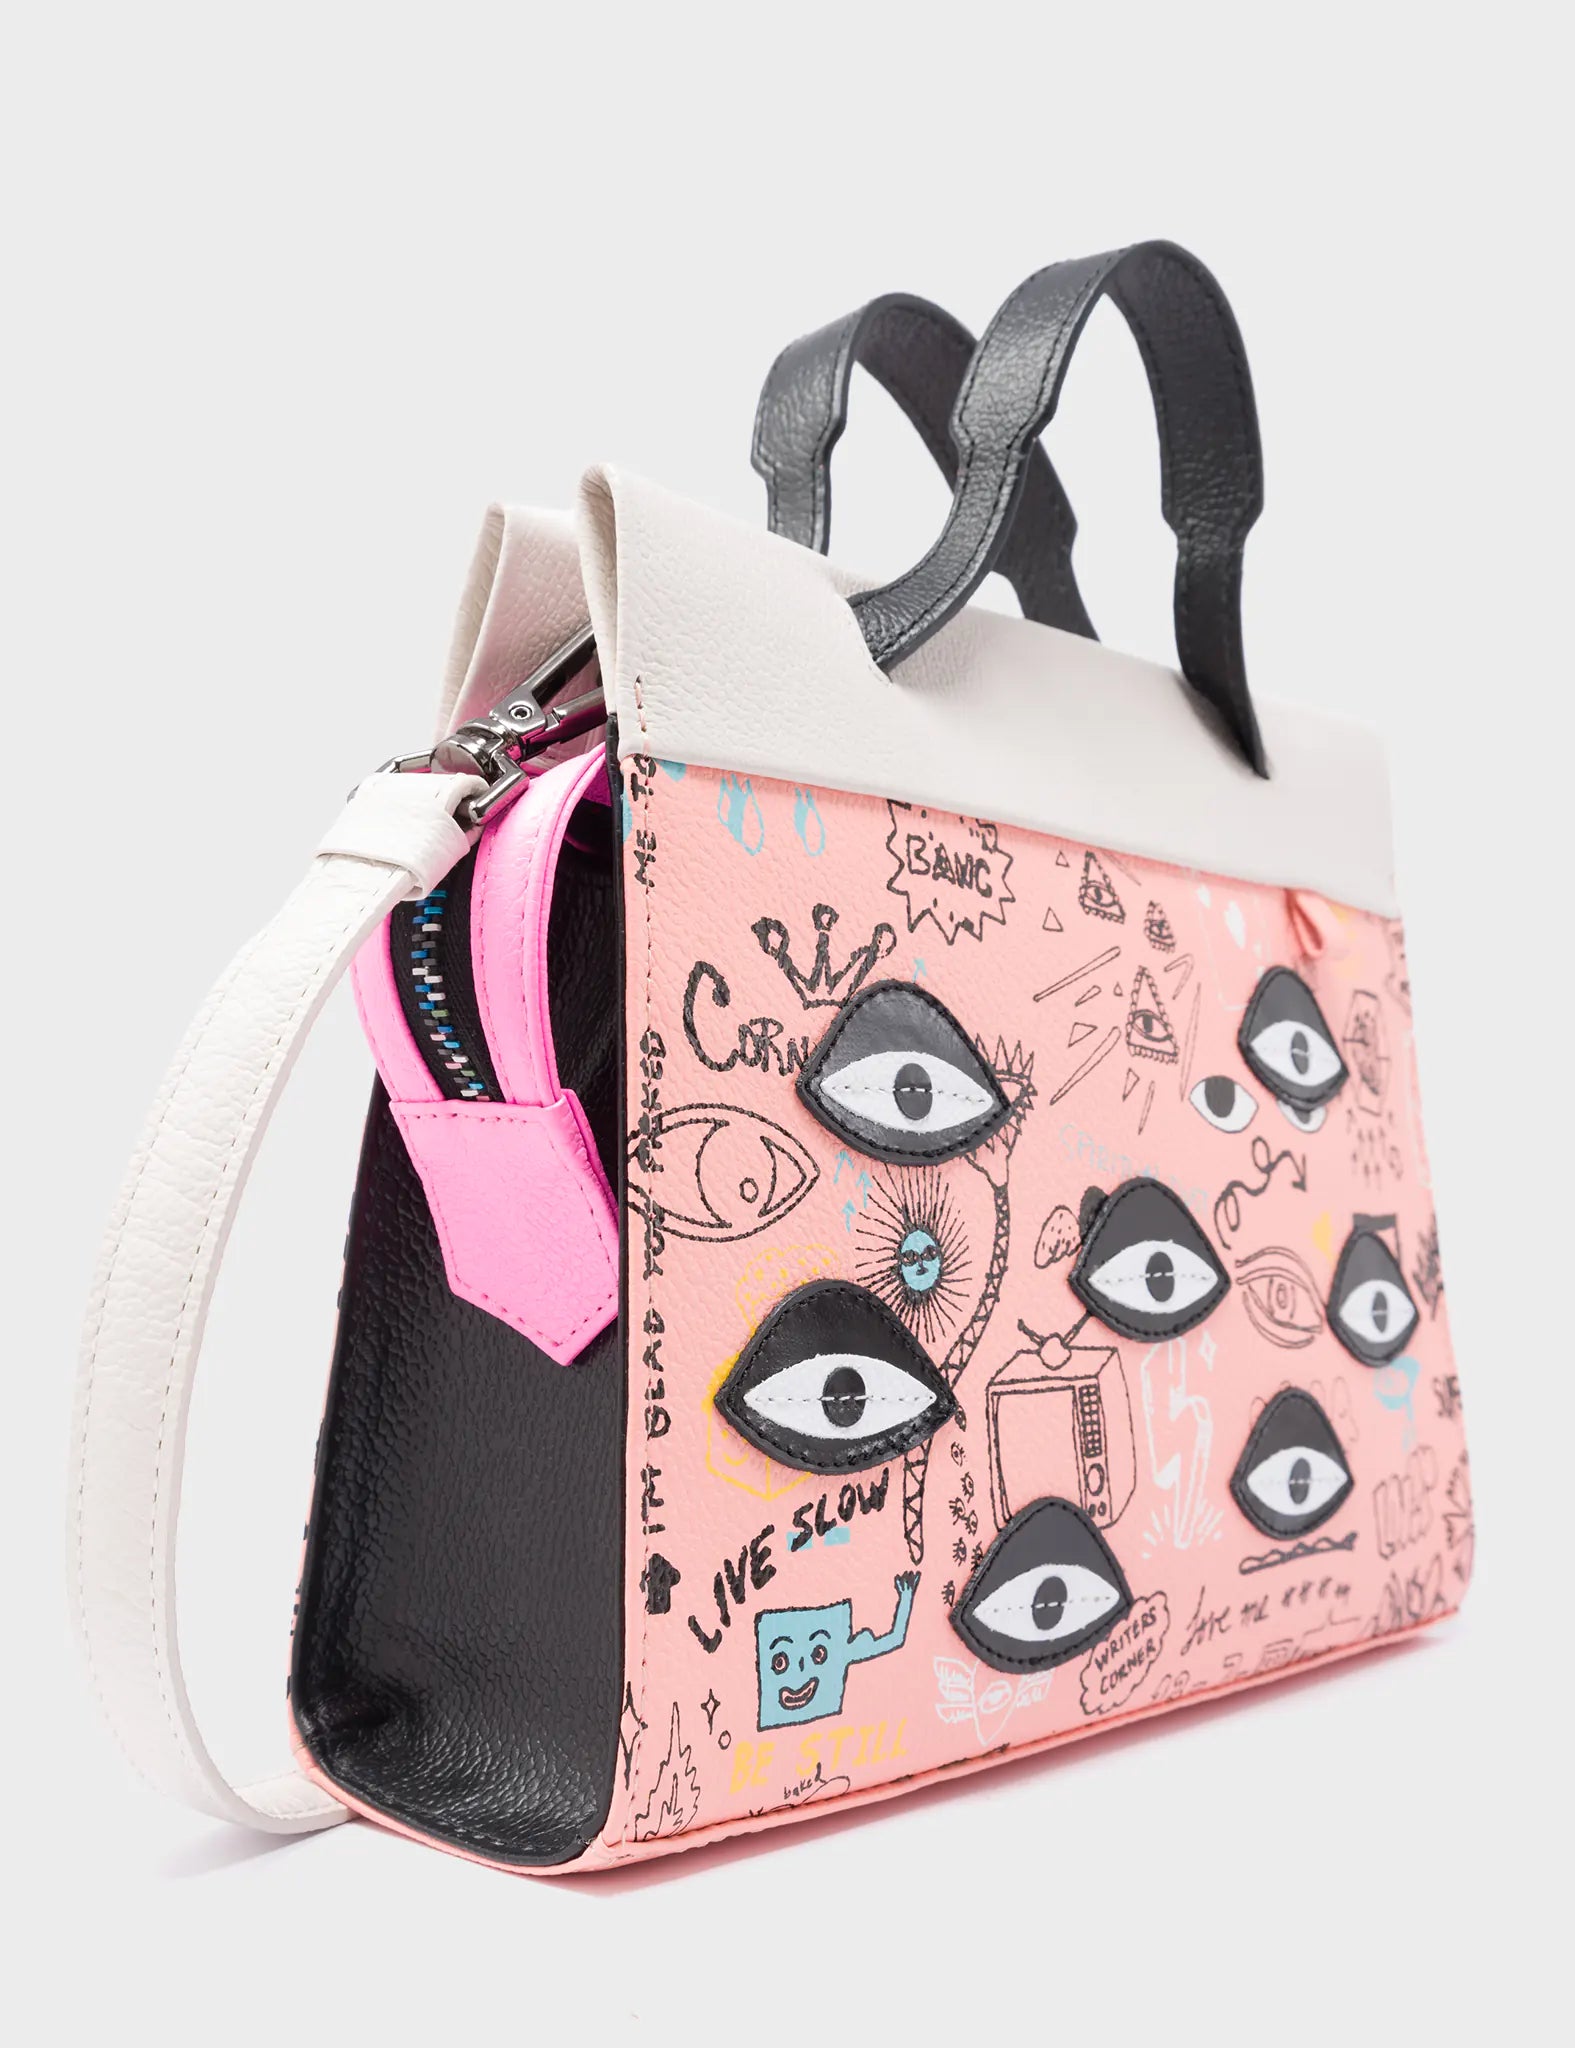 Vali Crossbody Small Rosa Leather Bag - Urban Doodles Print and Eyes Applique - Detail View